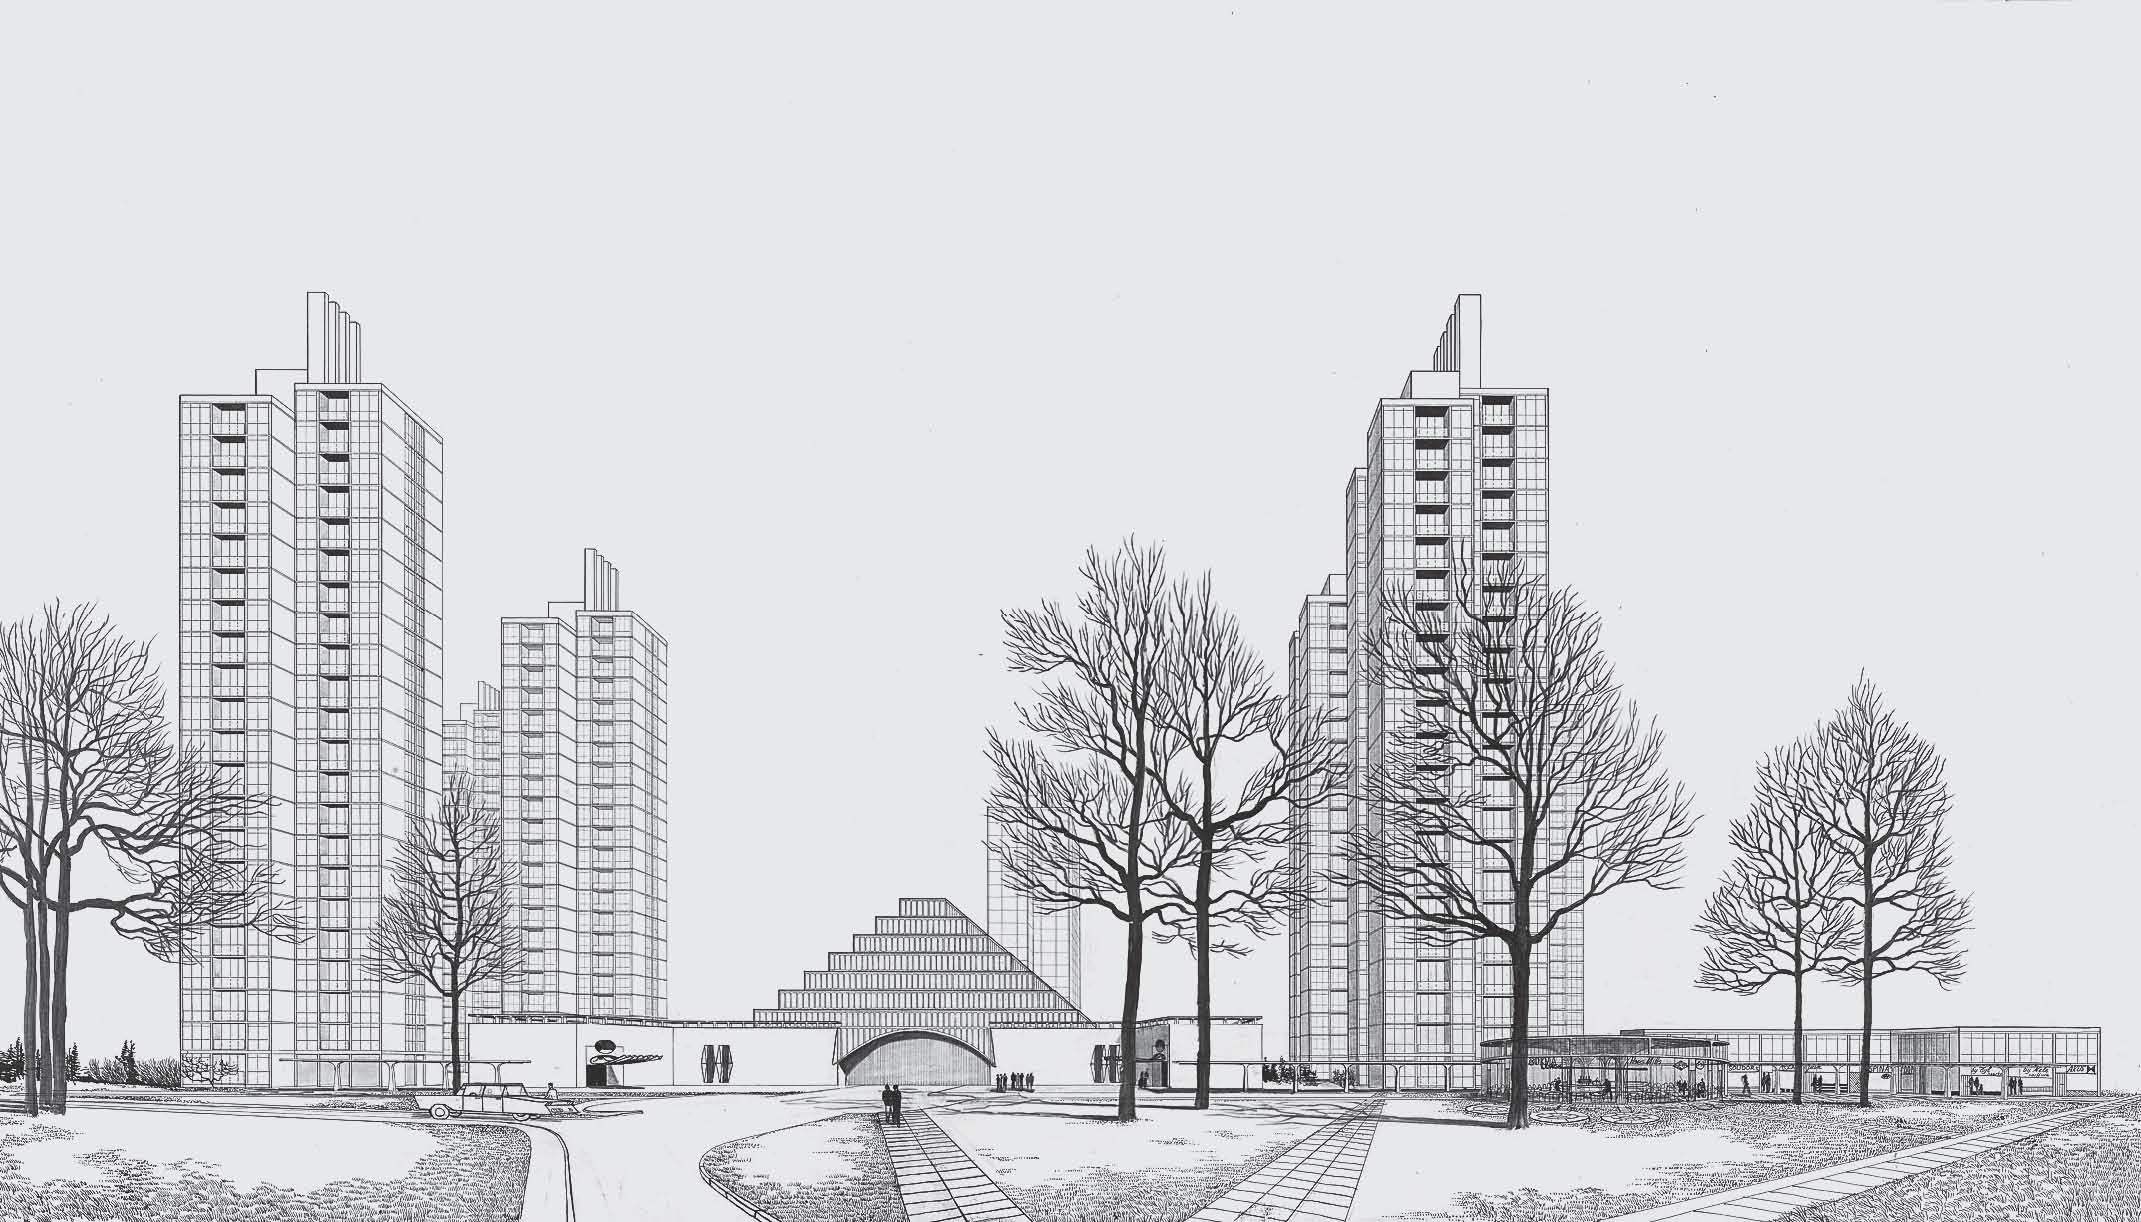 An Inquiry into Intentional Values: The Arenawijk in Antwerp – Renaat Braem’s Modernist Social Housing Ensemble as a Case Study